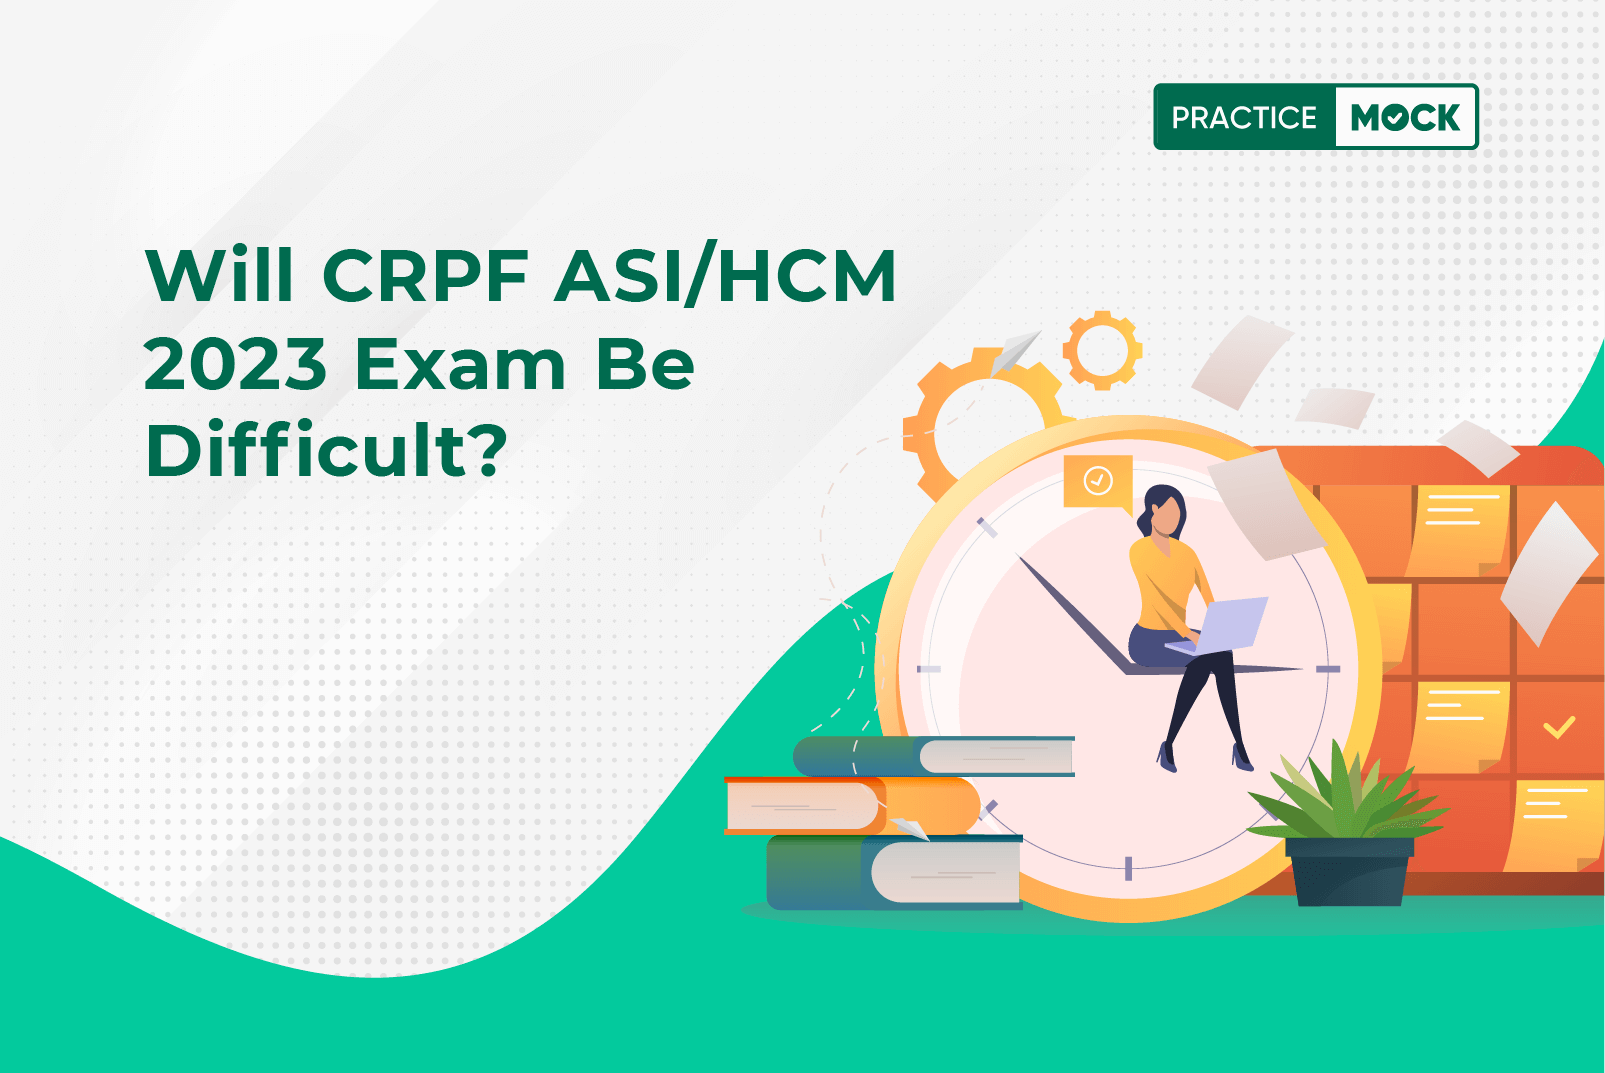 Will CRPF ASI/Head Constable 2023 Exam be Difficult?